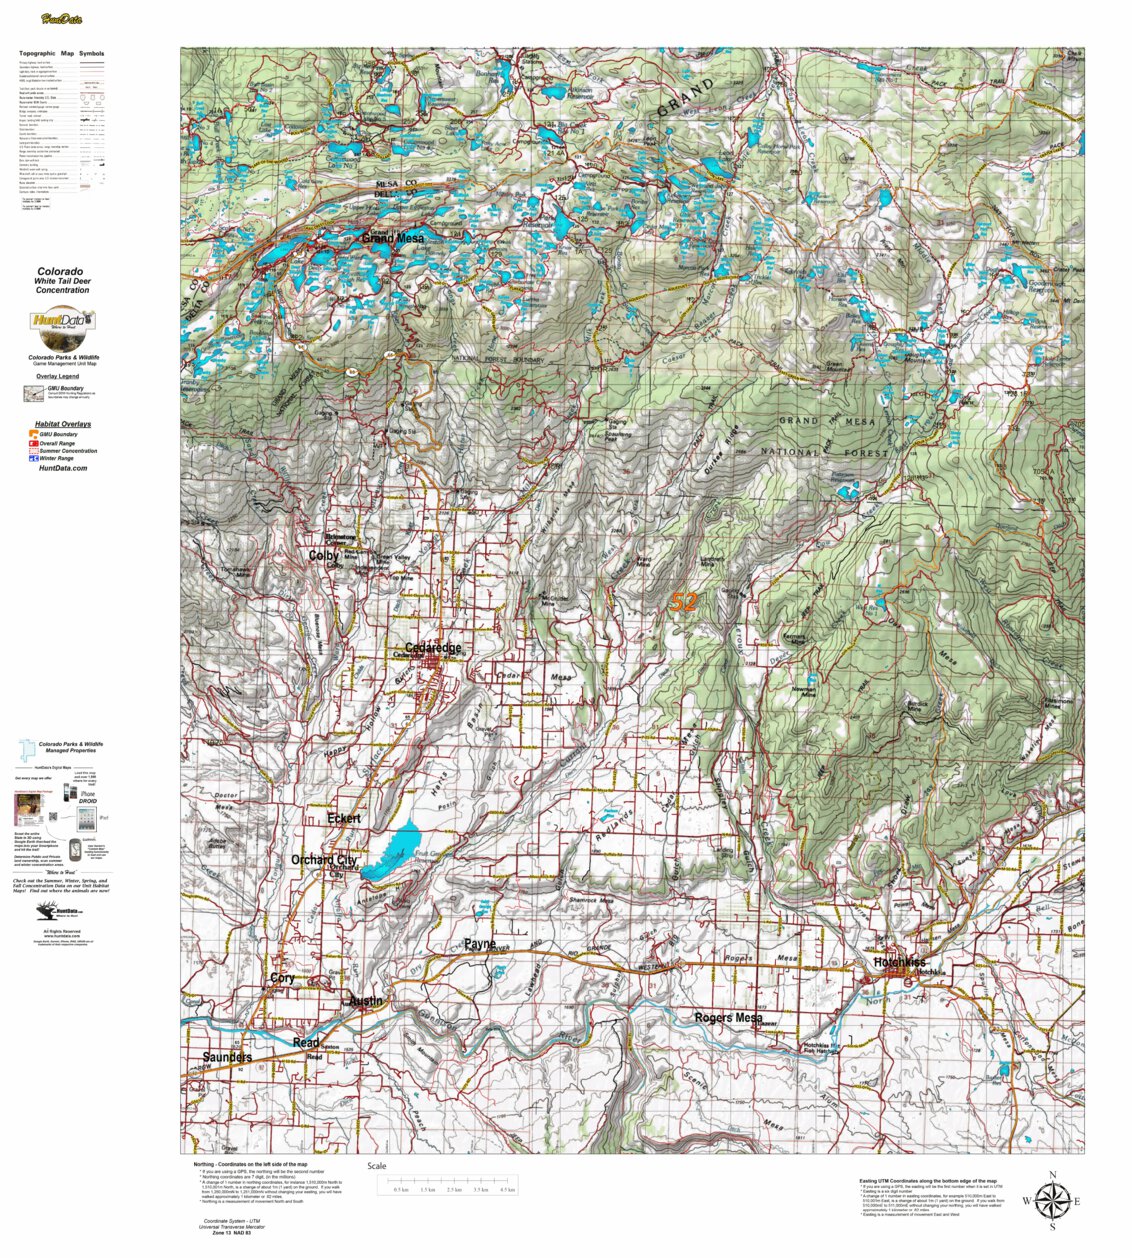 CO_52_White_Tail_Deer_Habitat map by Colorado HuntData LLC - Avenza Maps